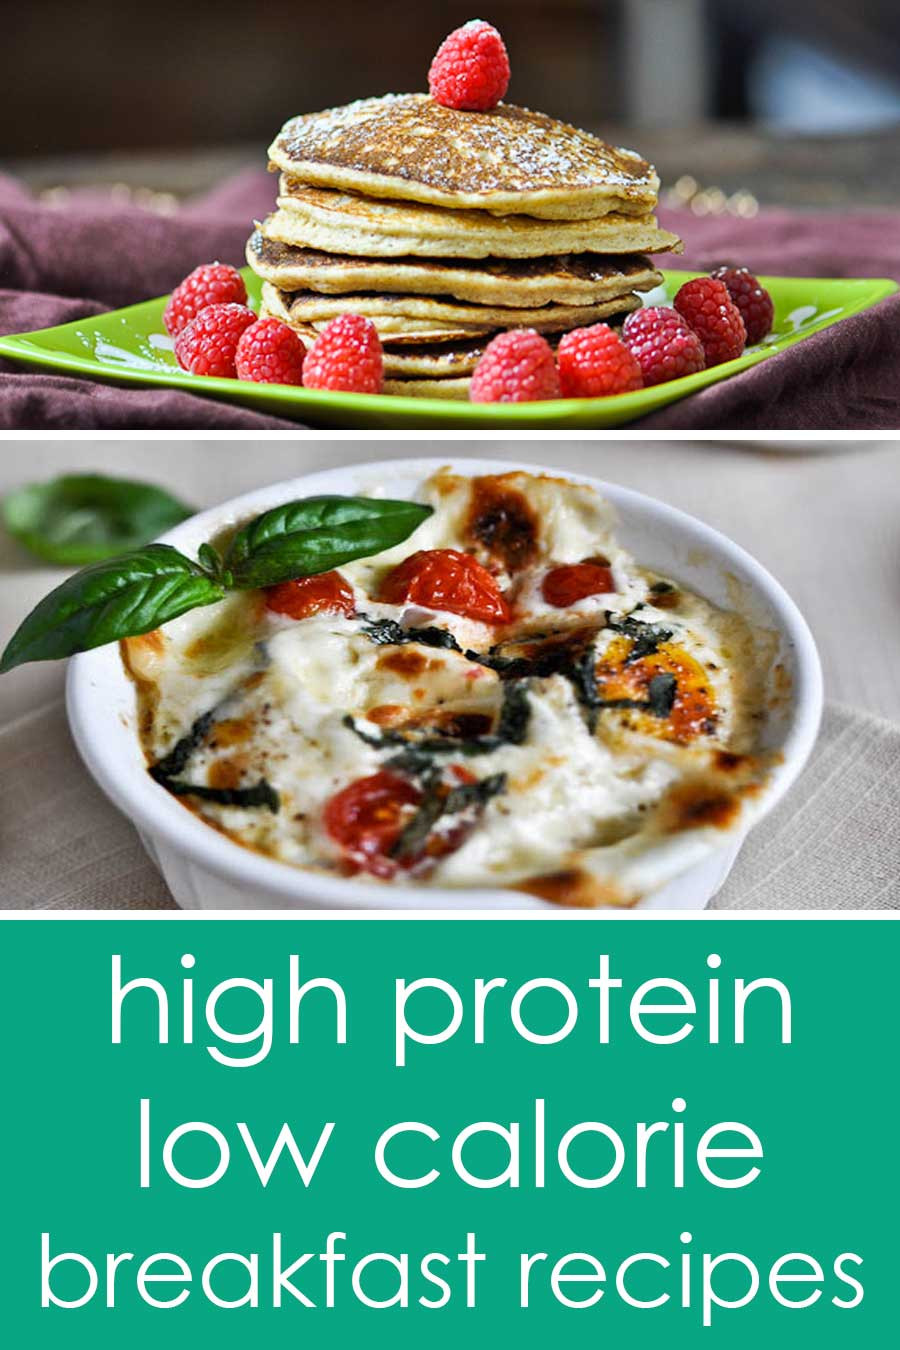 High Protein Low Calorie Recipes
 22 High protein low calorie breakfast recipes